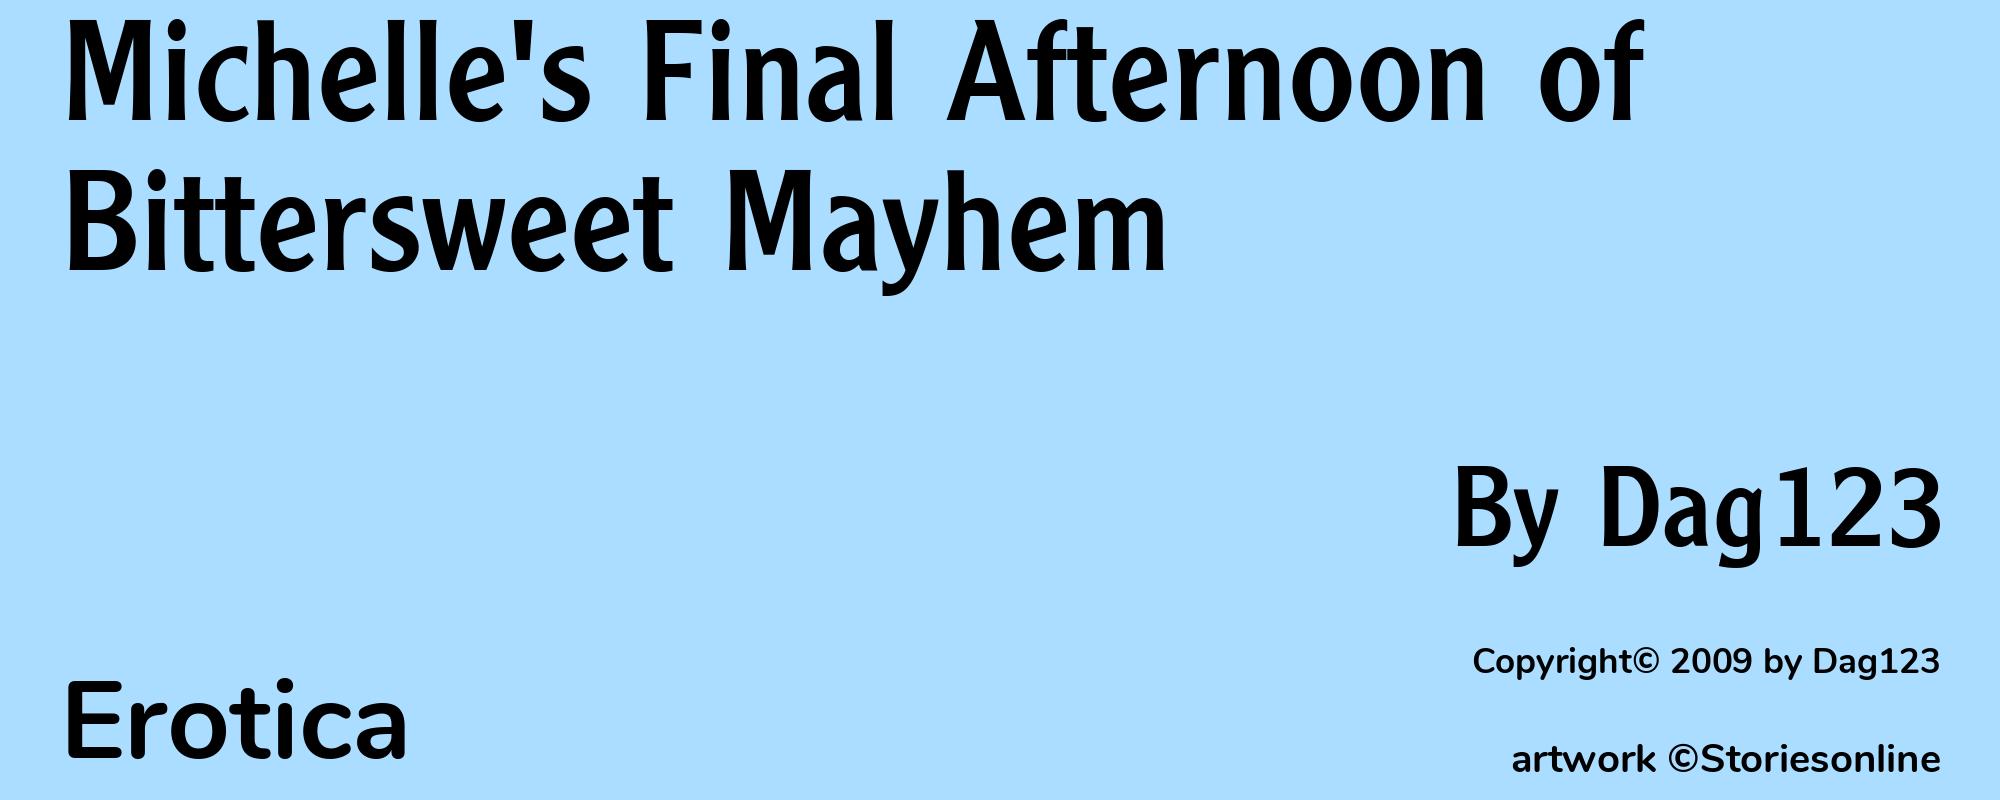 Michelle's Final Afternoon of Bittersweet Mayhem - Cover